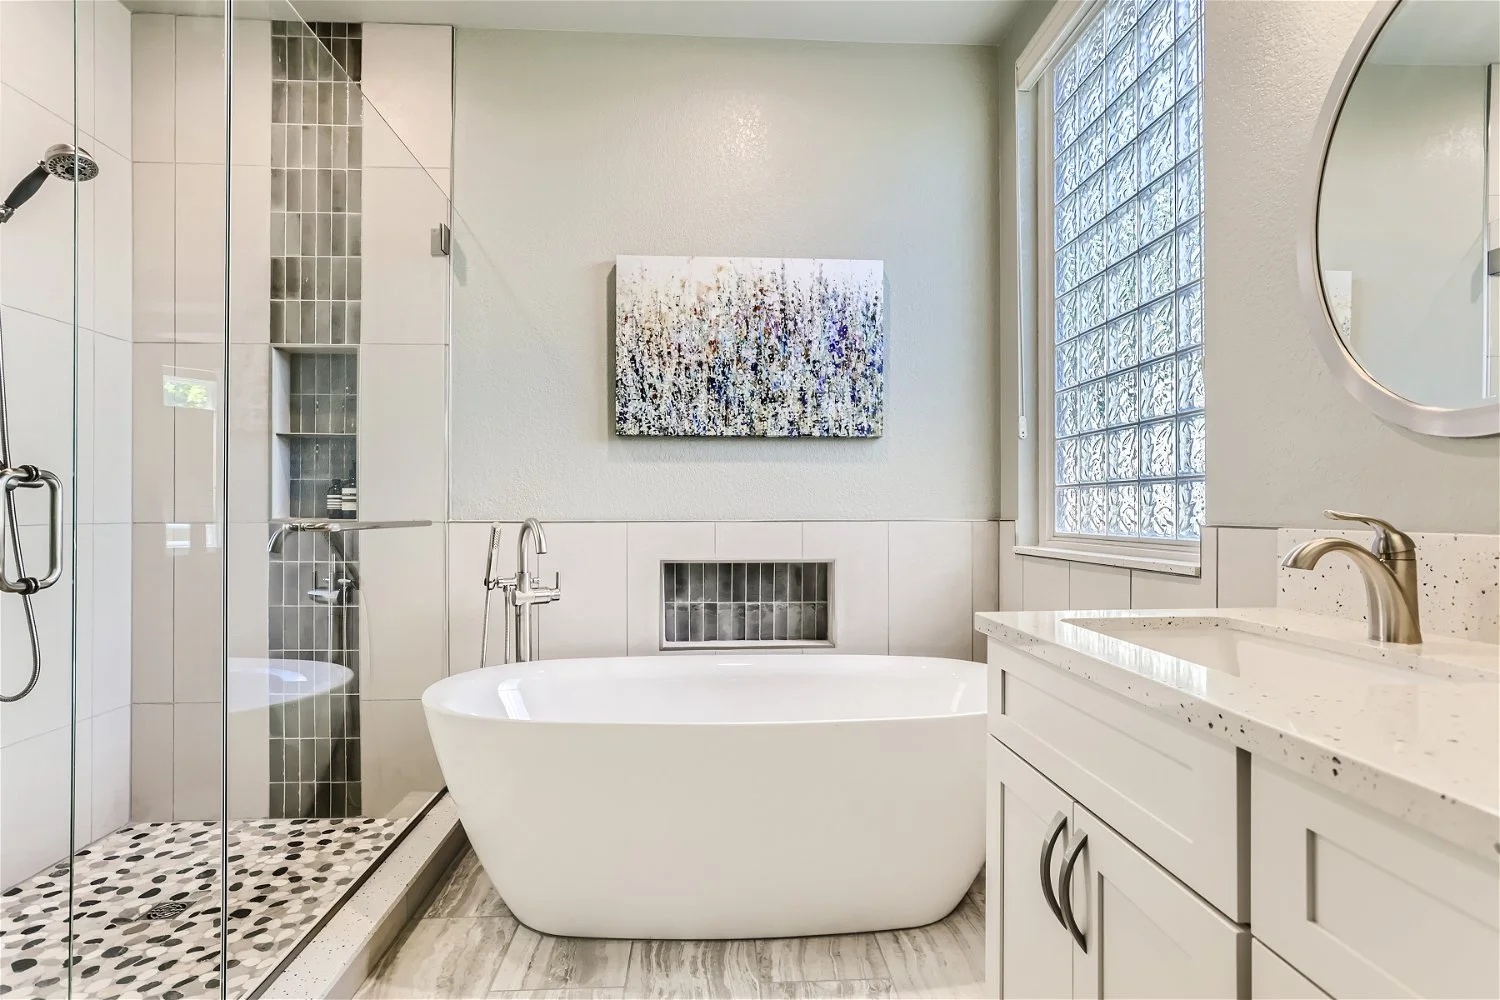 How to Add Value to Your Property with a Bathroom Remodel